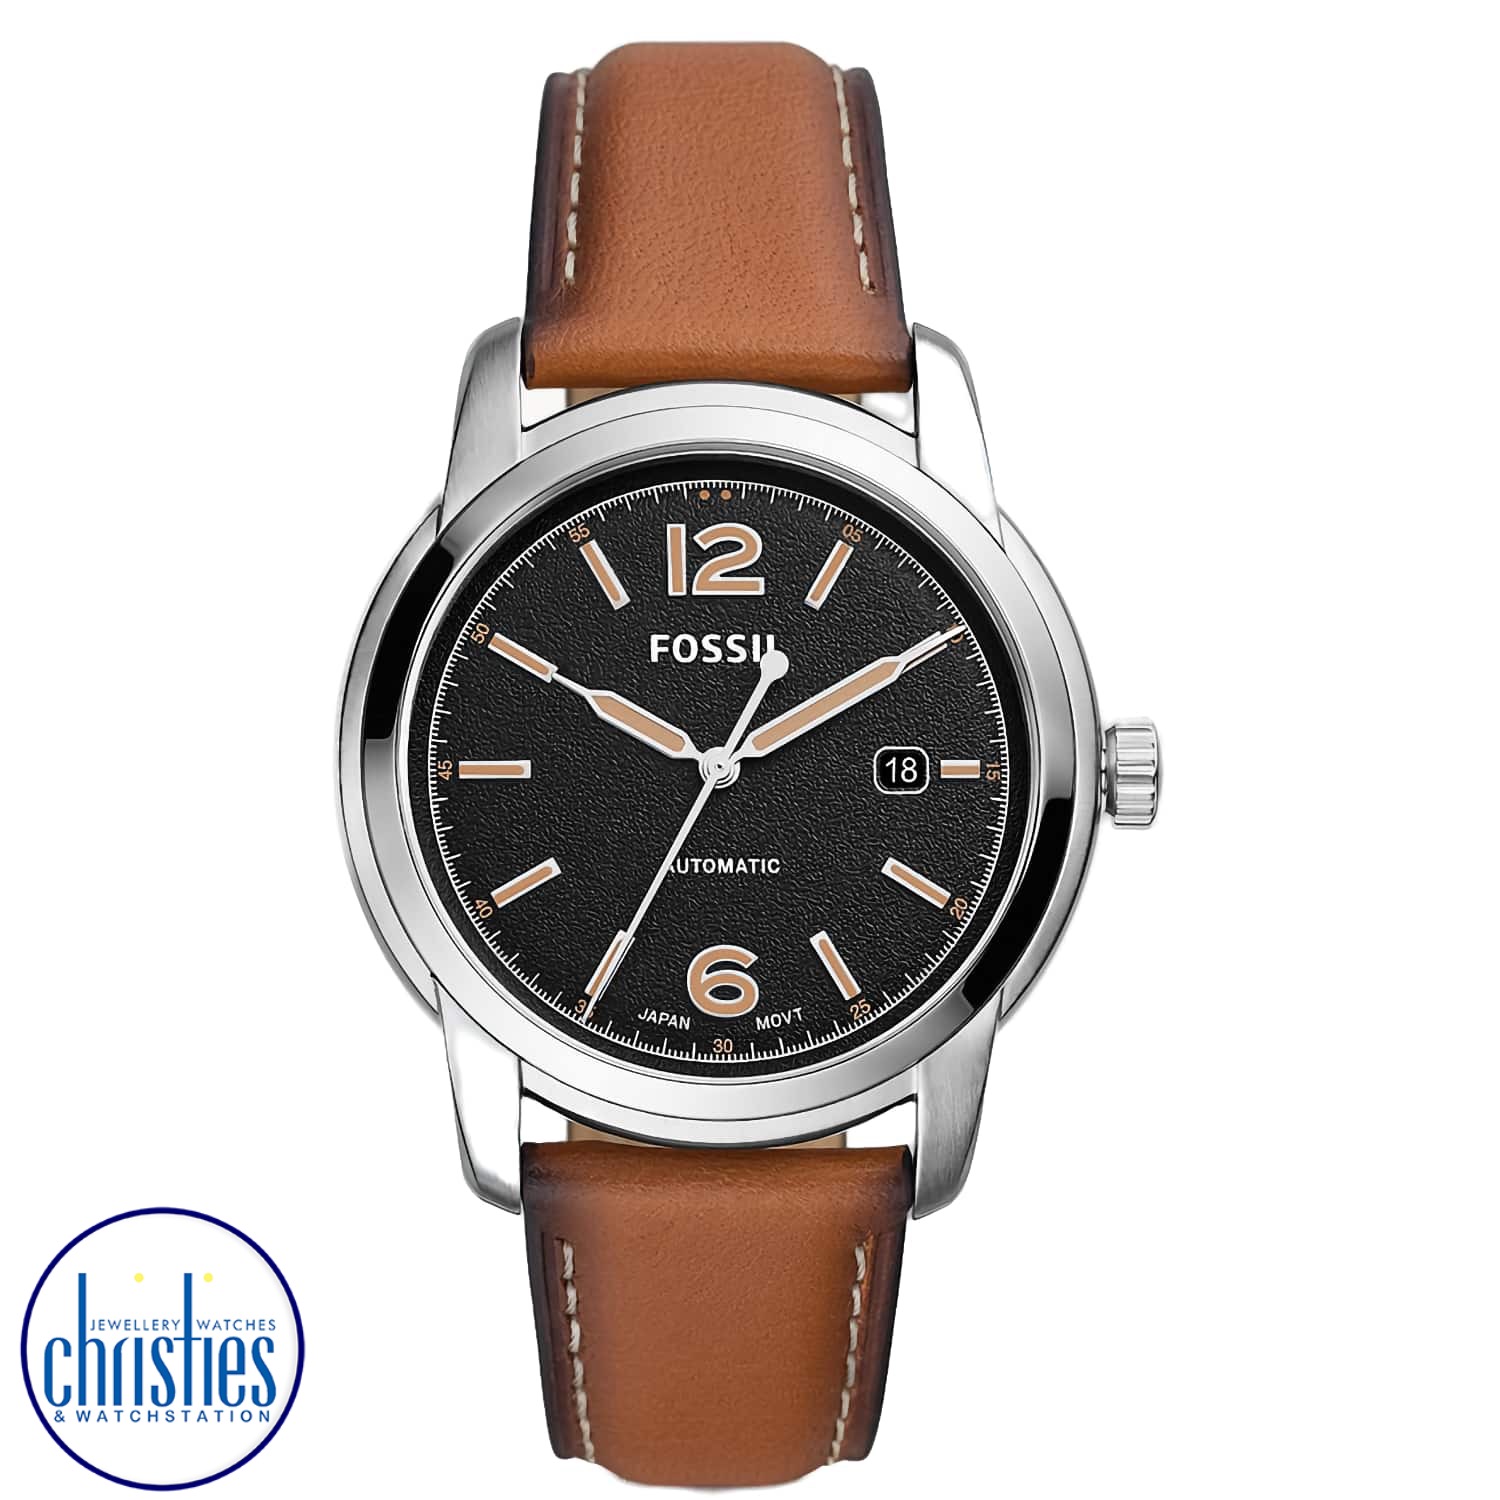 ME3233 Fossil Heritage Automatic  Luggage Leather Watch. ME3233 Fossil Heritage Automatic  Luggage Leather WatchAfterpay - Split your purchase into 4 instalments - Pay for your purchase over 4 instalments, due every two weeks. fossil mens watches nz